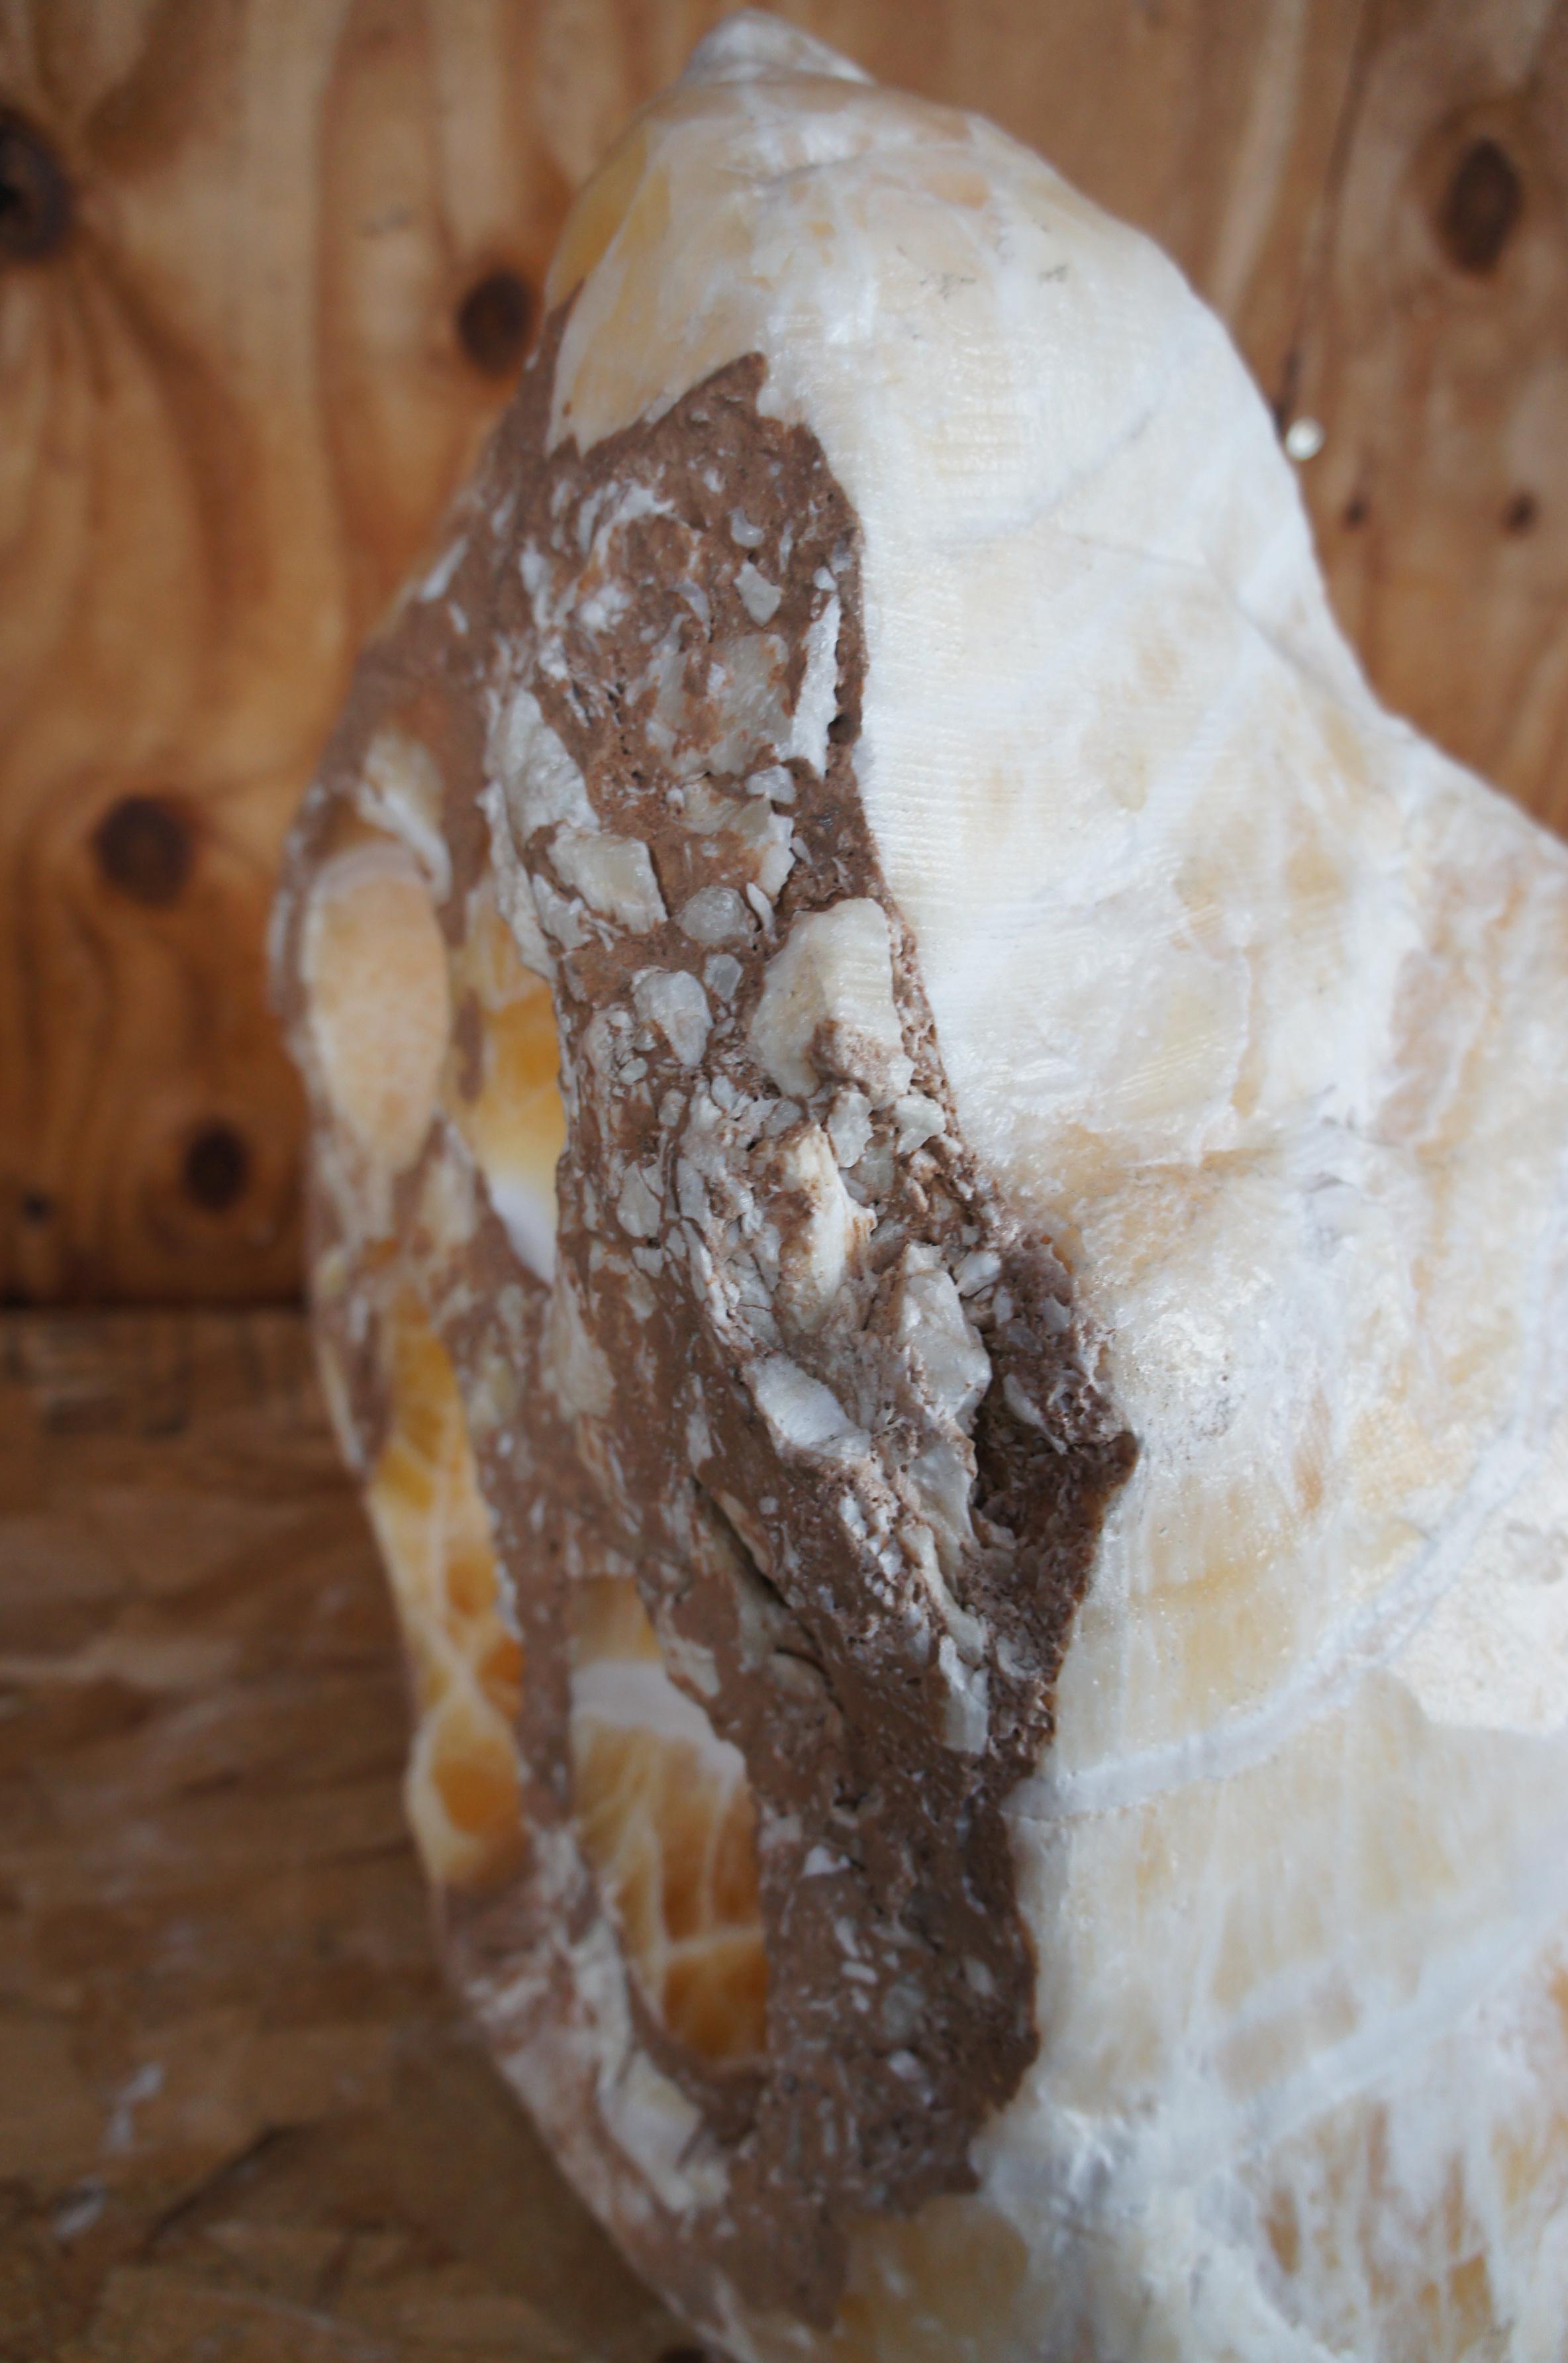 102lb Honeycomb Calcite Amber Onyx Rock Stone Crystal Formation Drilled Holes In Good Condition For Sale In Dayton, OH